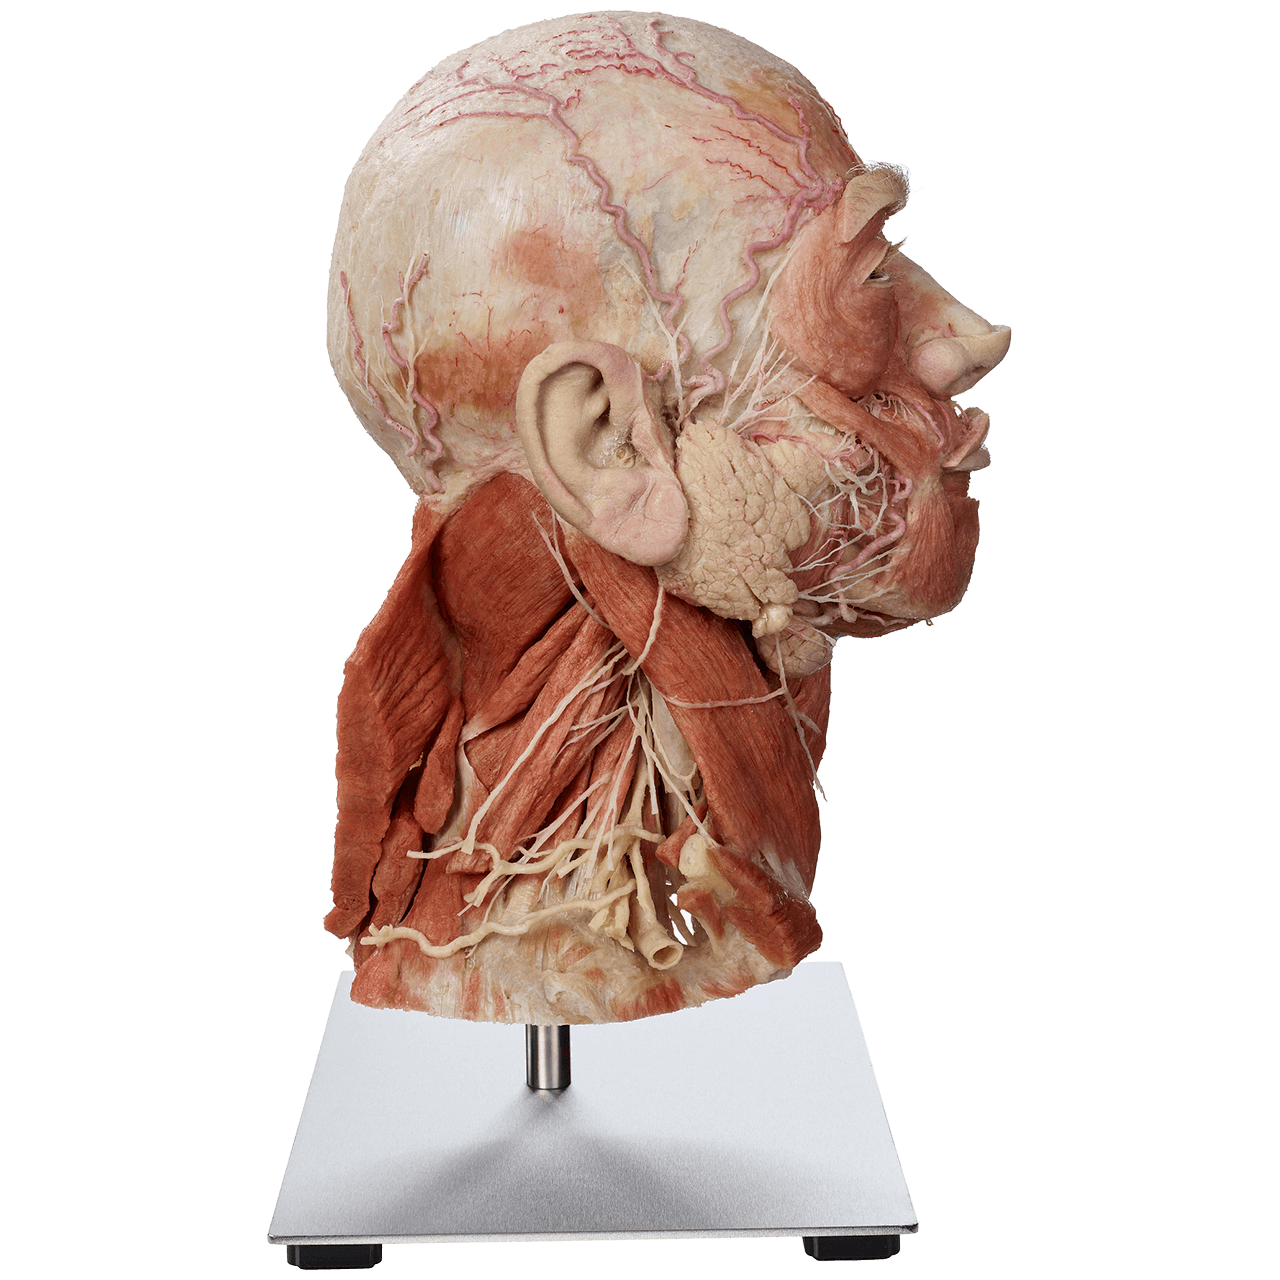 Side view of a plastinated human head from Anatomic Excellence and von Hagens Plastination